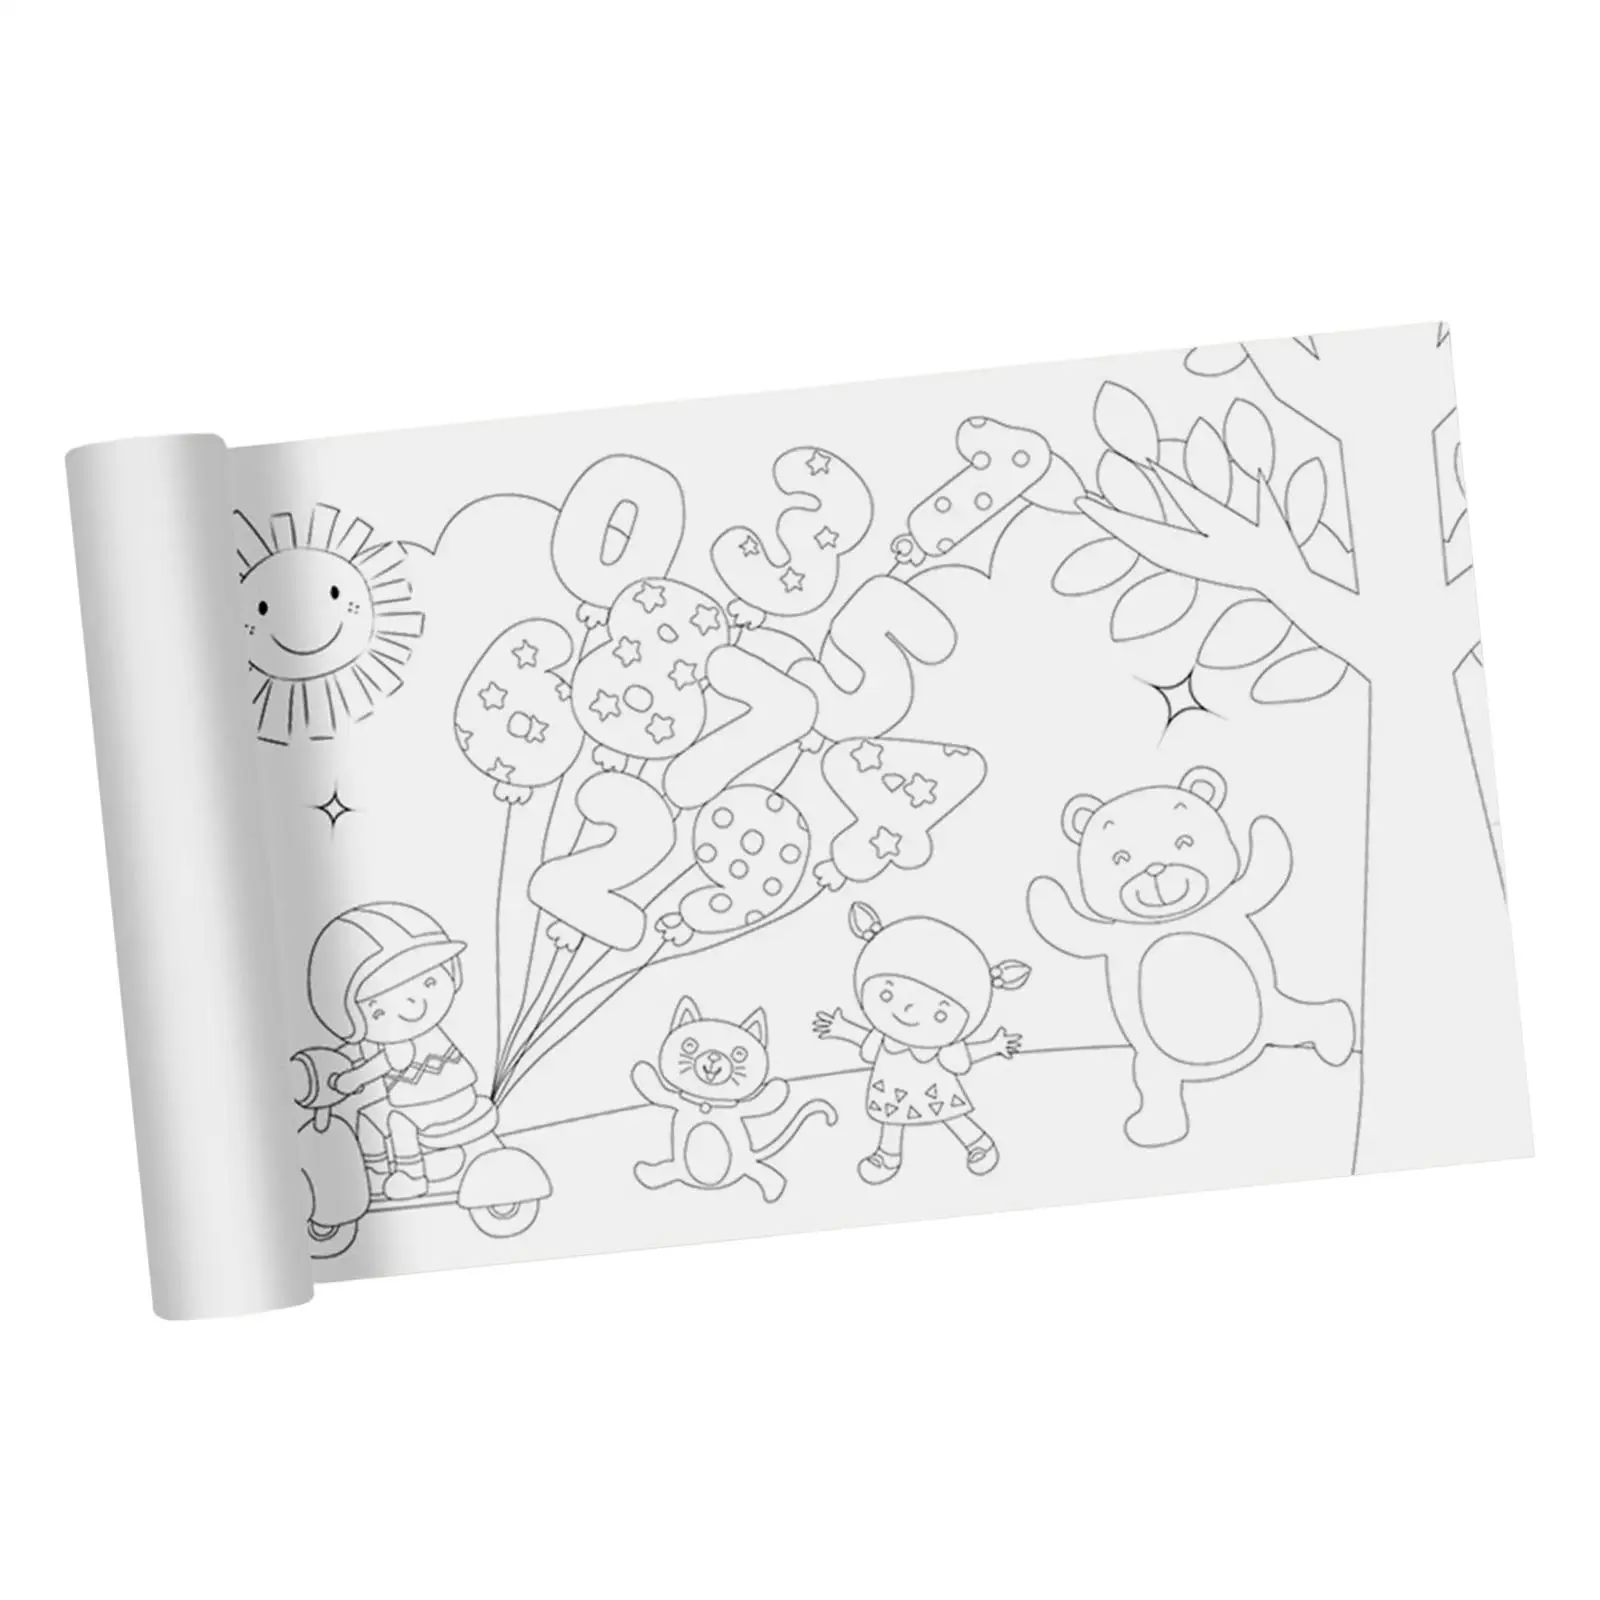 Children Colouring Roll Supplies Essential Enlightenment Coloring Paper Roll